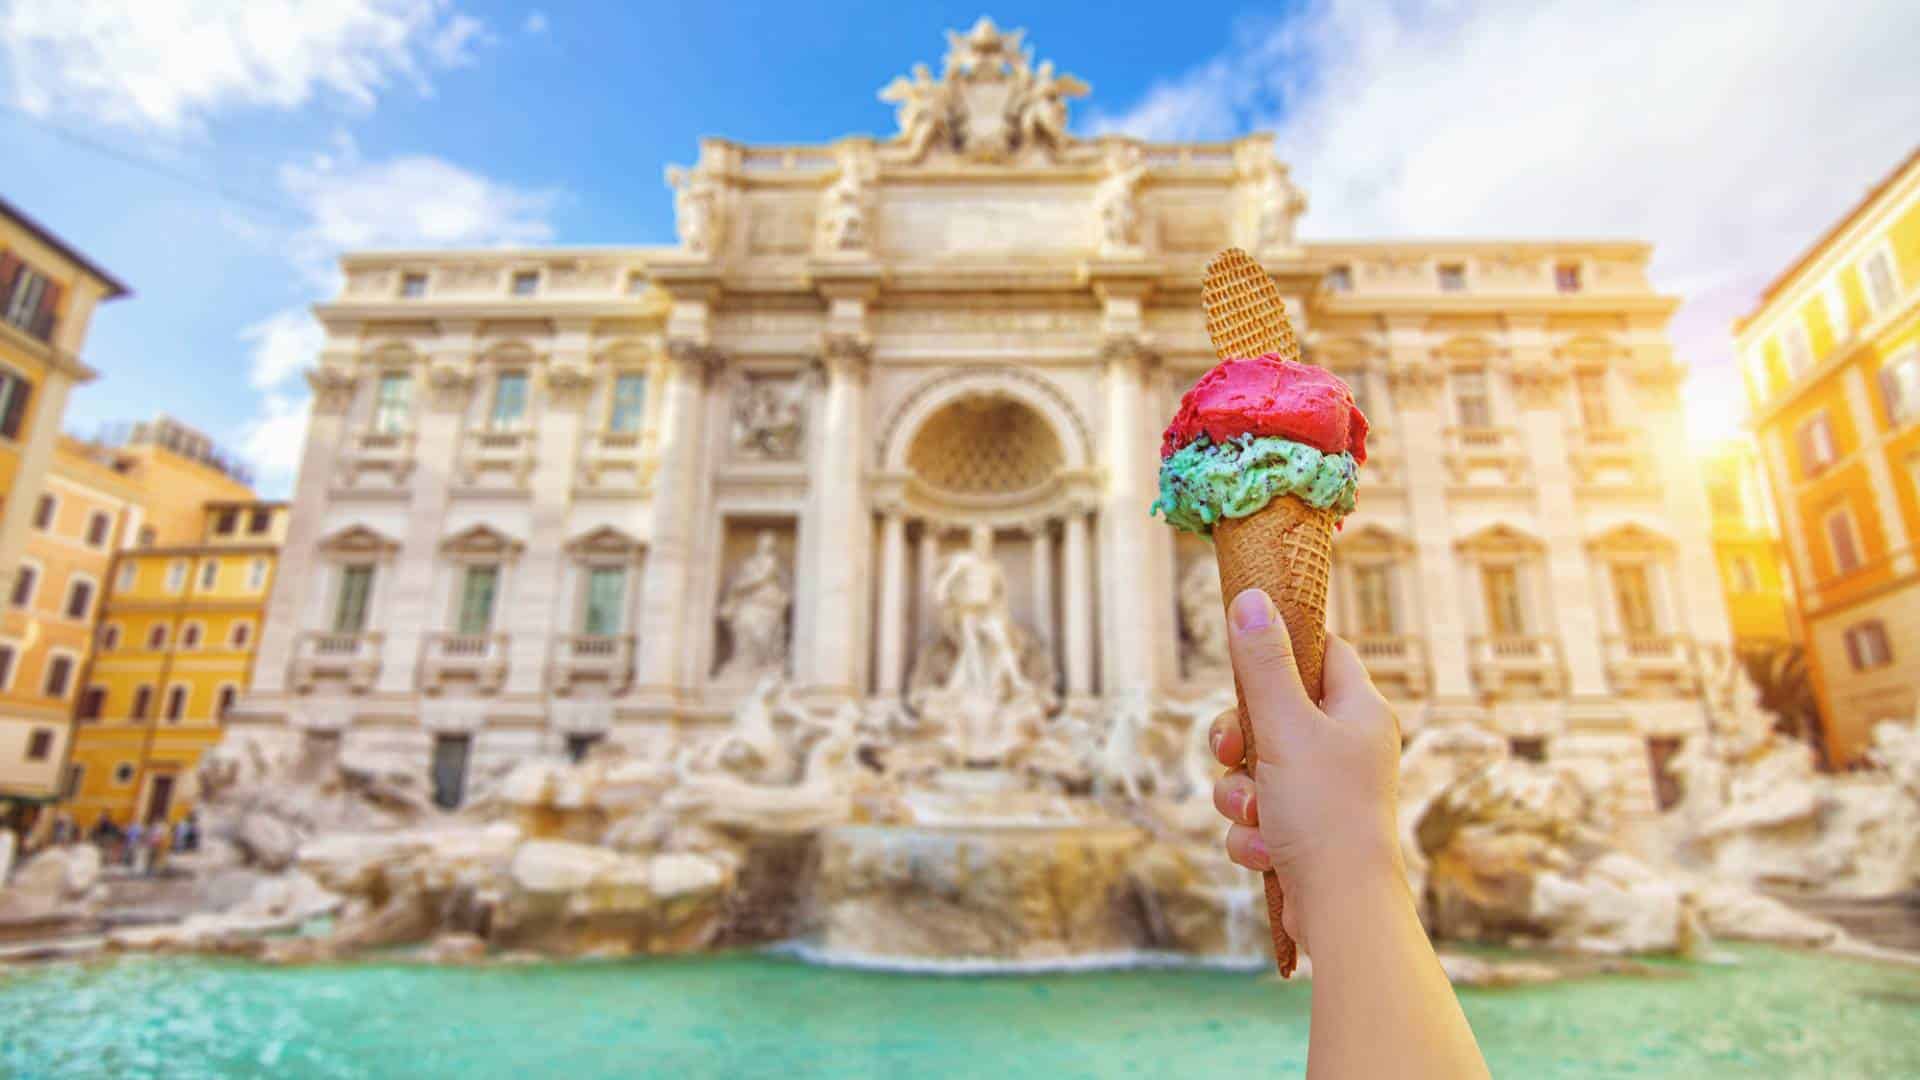 Famous landmark Trevi Fountain in Rome Italy on a sunny summer day with cone of Italian gelato in the foreground.